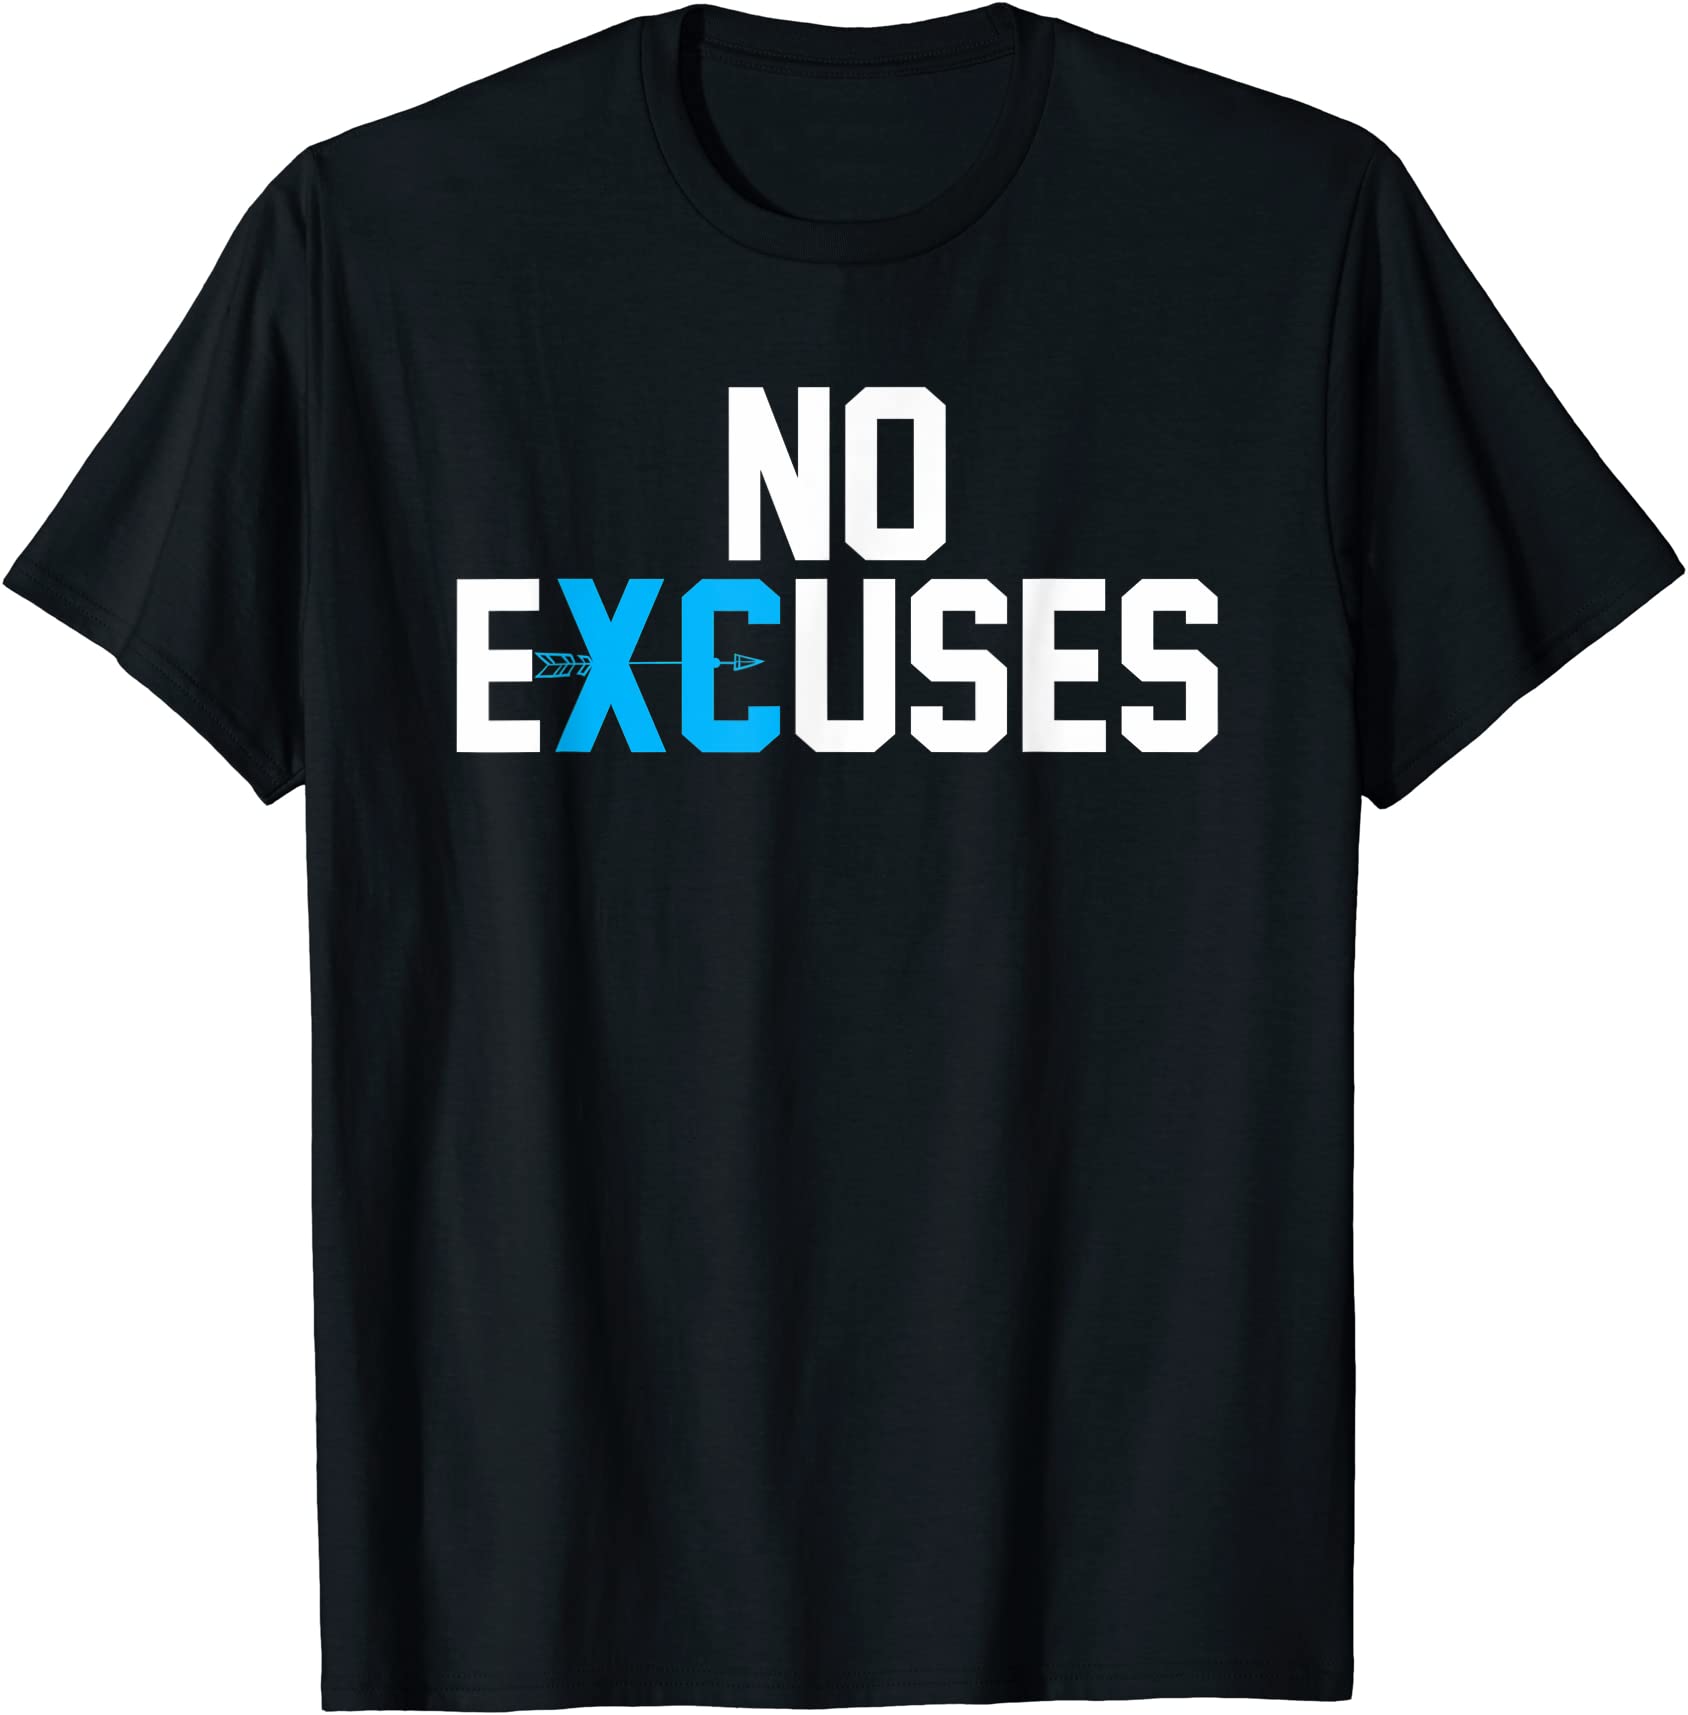 no excuses cross country track and field running gift t shirt men - Buy ...